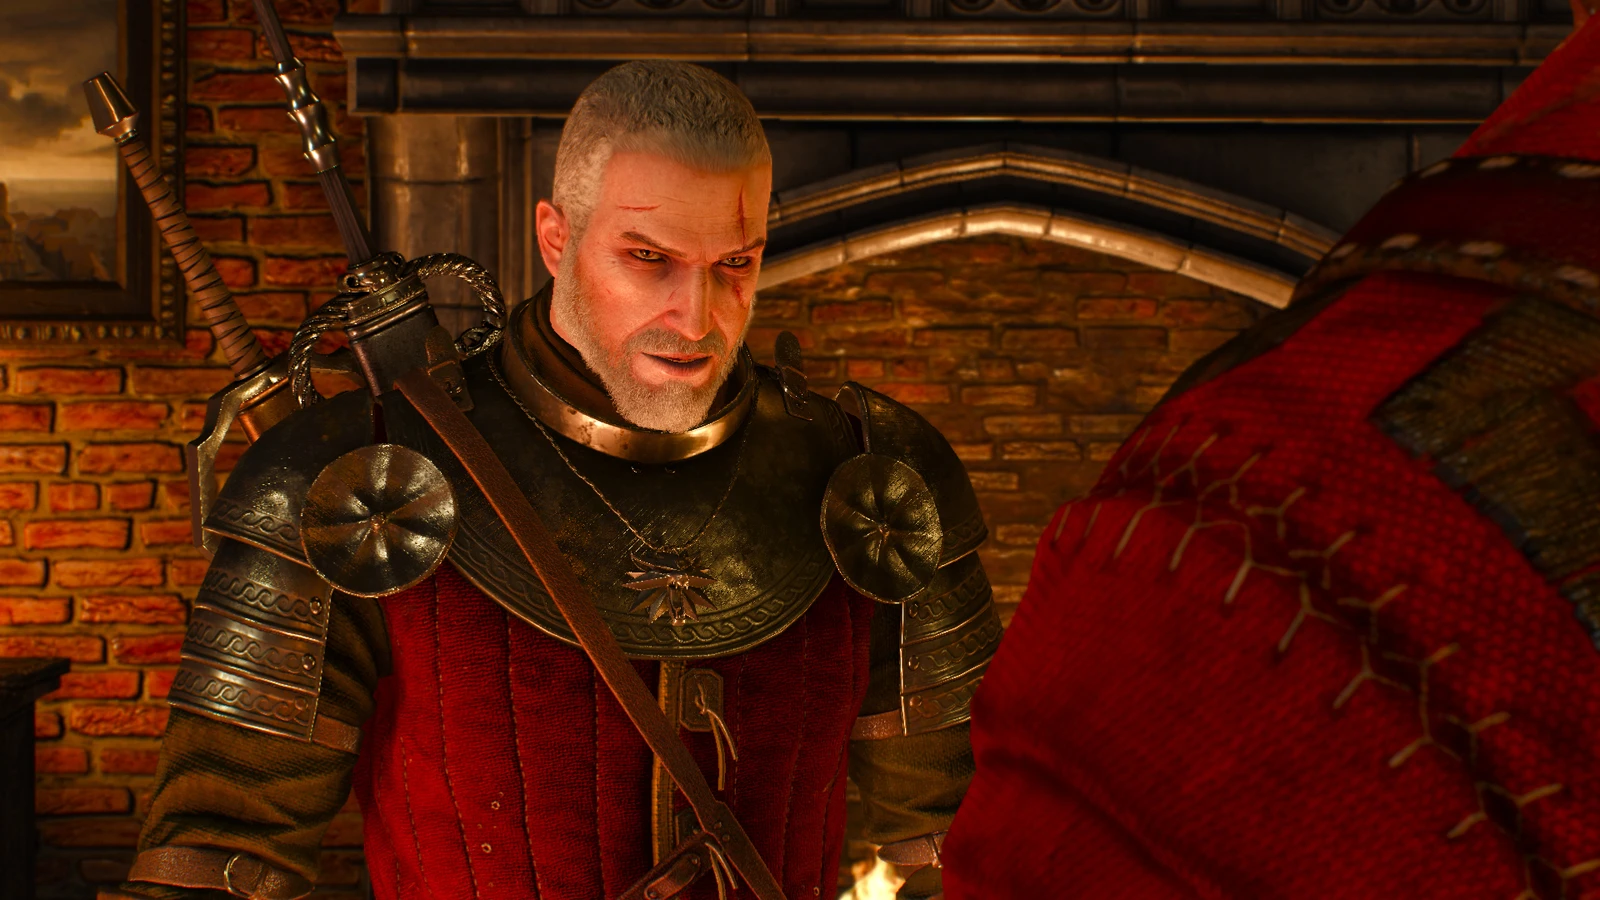 A new the witcher 3 mod has been released online